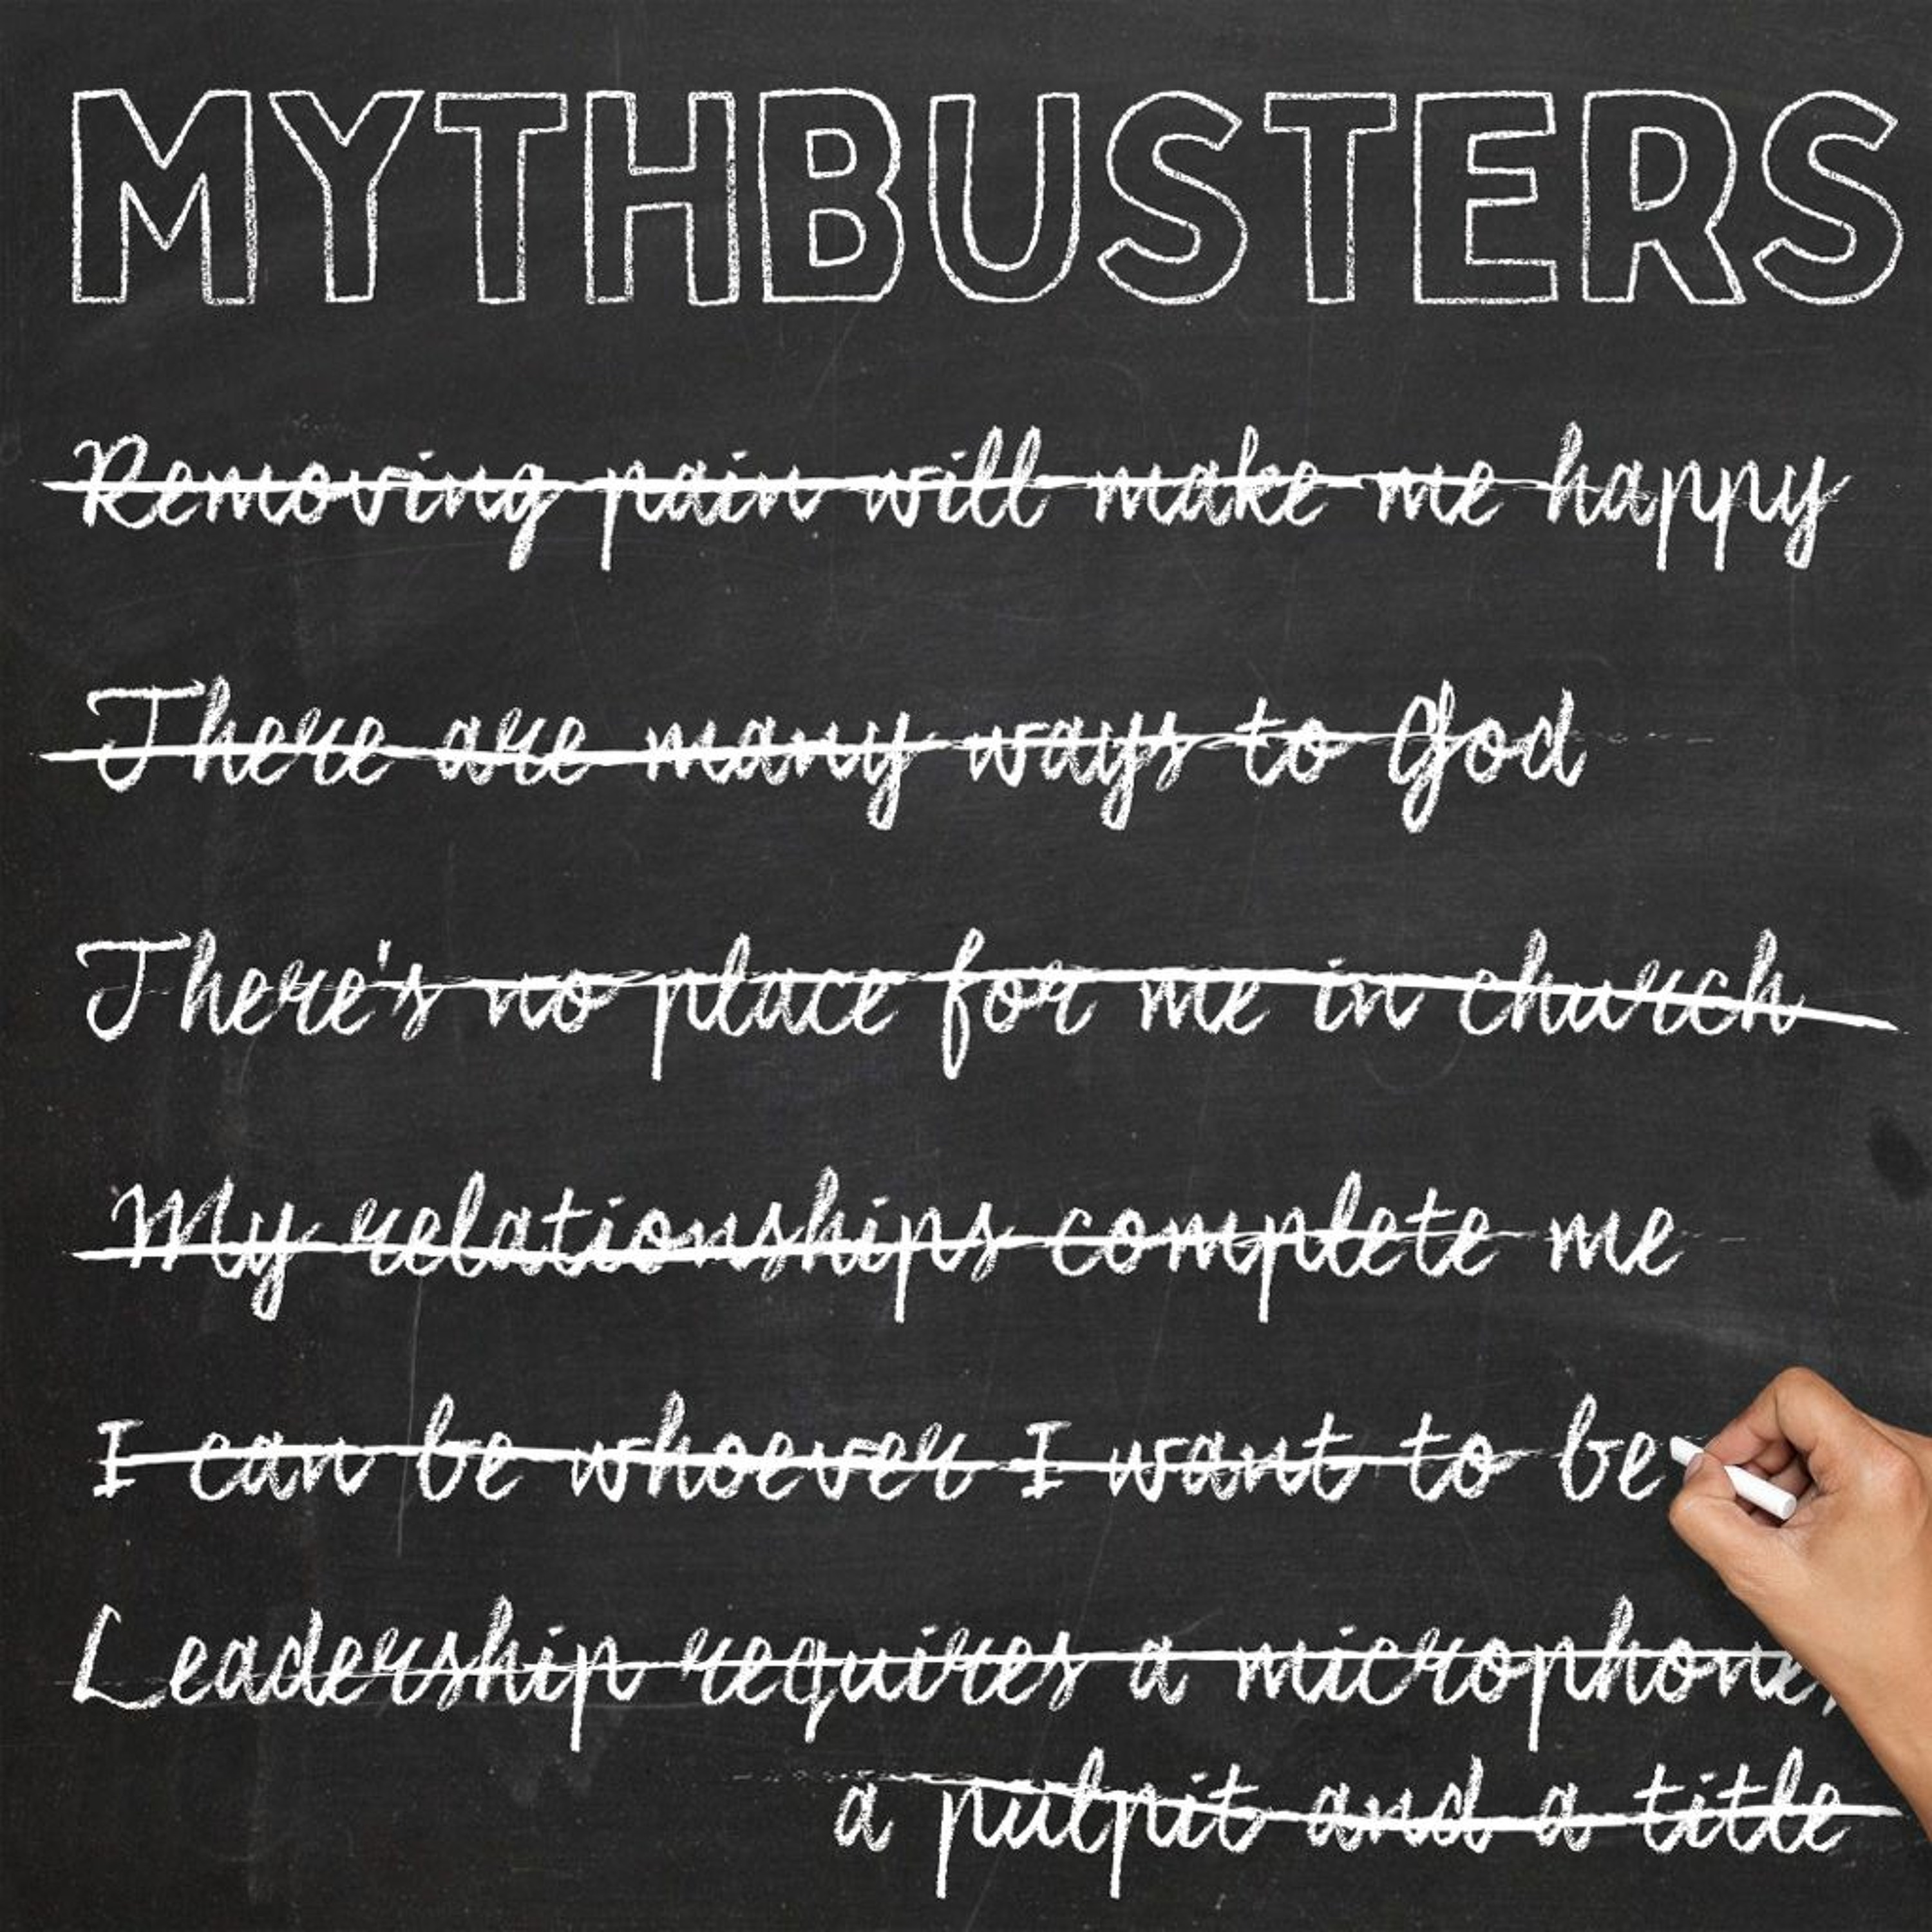 Myth busters 6 Identity - Kerry Connolly - 2020.02.23